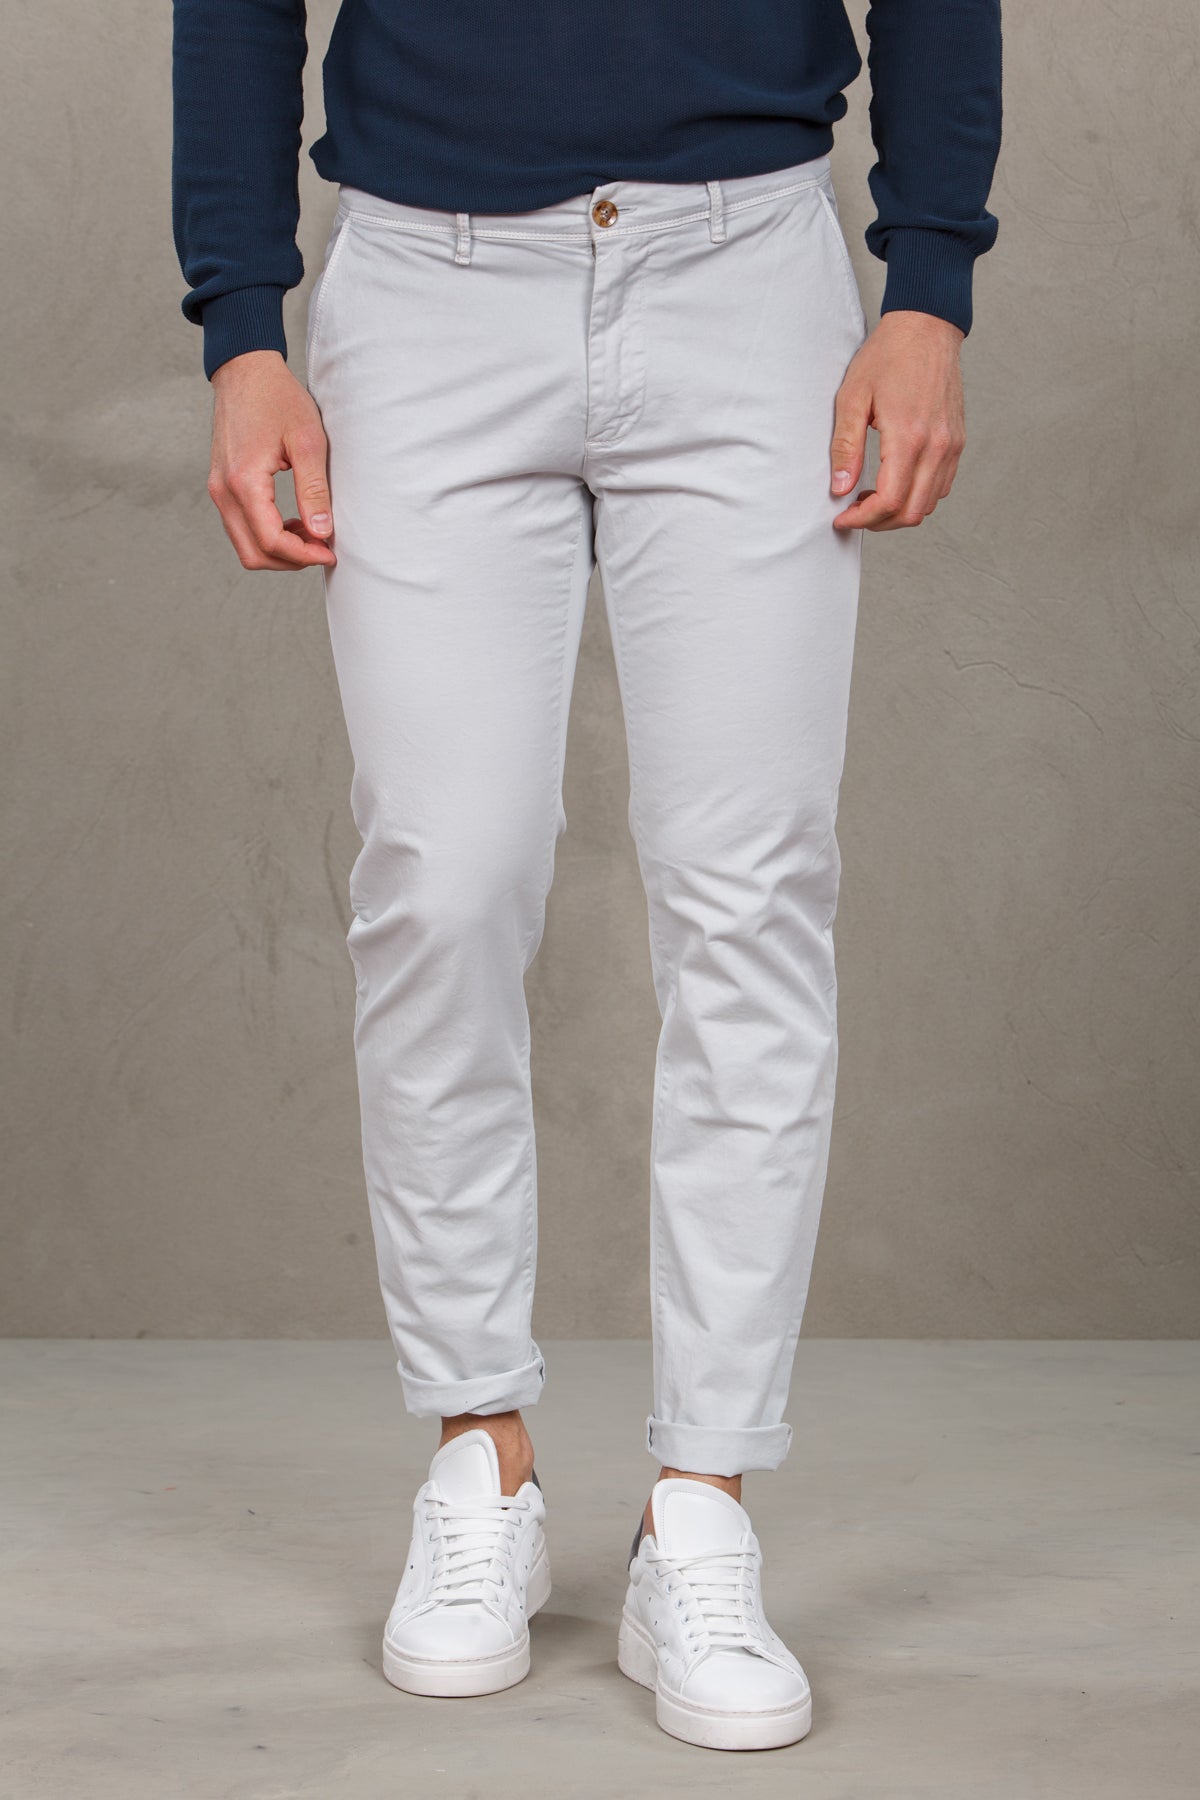 Men's chinos trousers -  cielo man  - 1